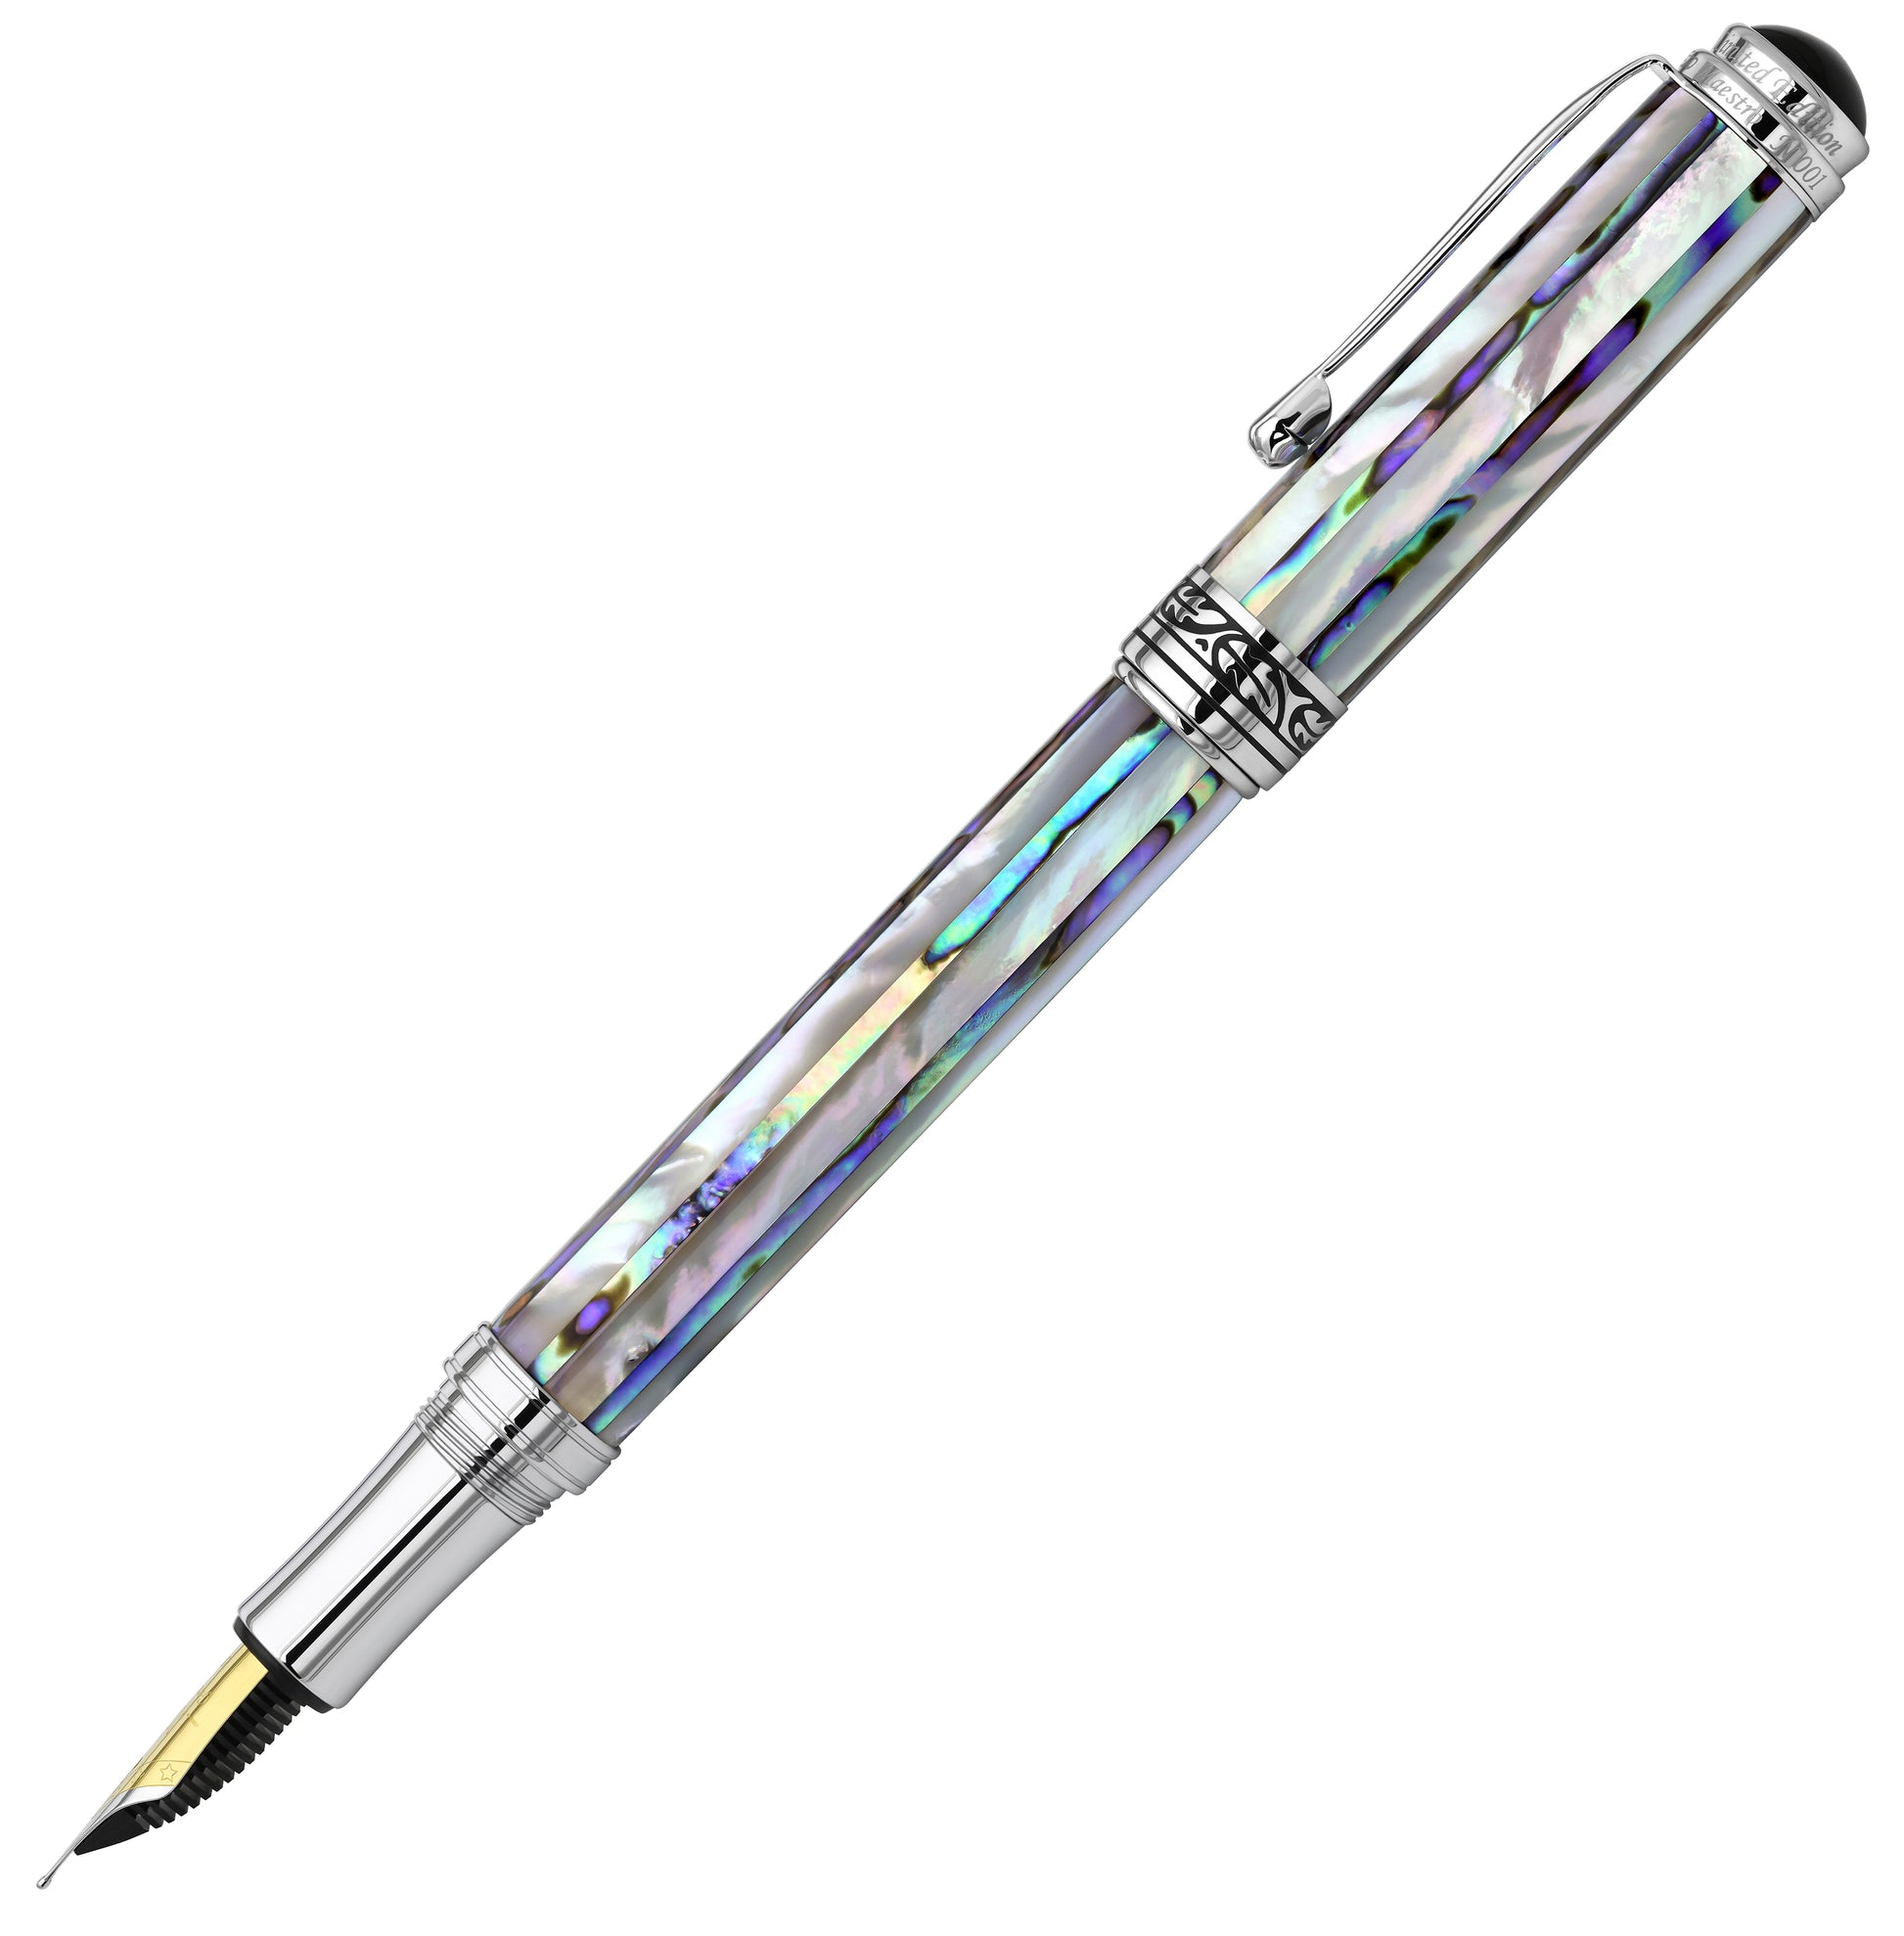 Maestro Jubilee mother-of-pearl Abalone Fountain Pen Uncapped at Angle